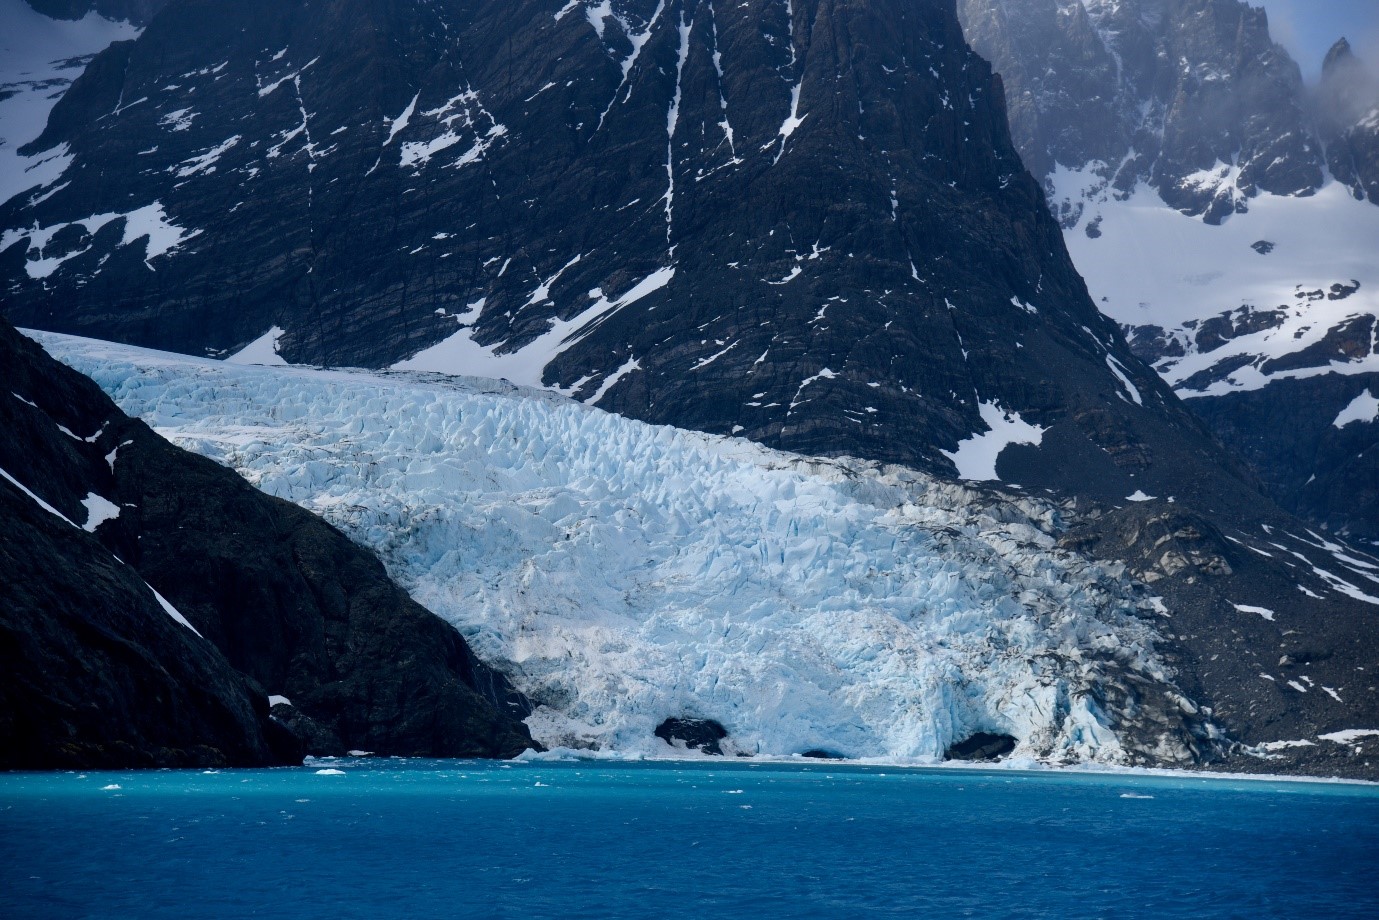 One of the many stunning glaciers in Drygalski fjord © Peter Fisher